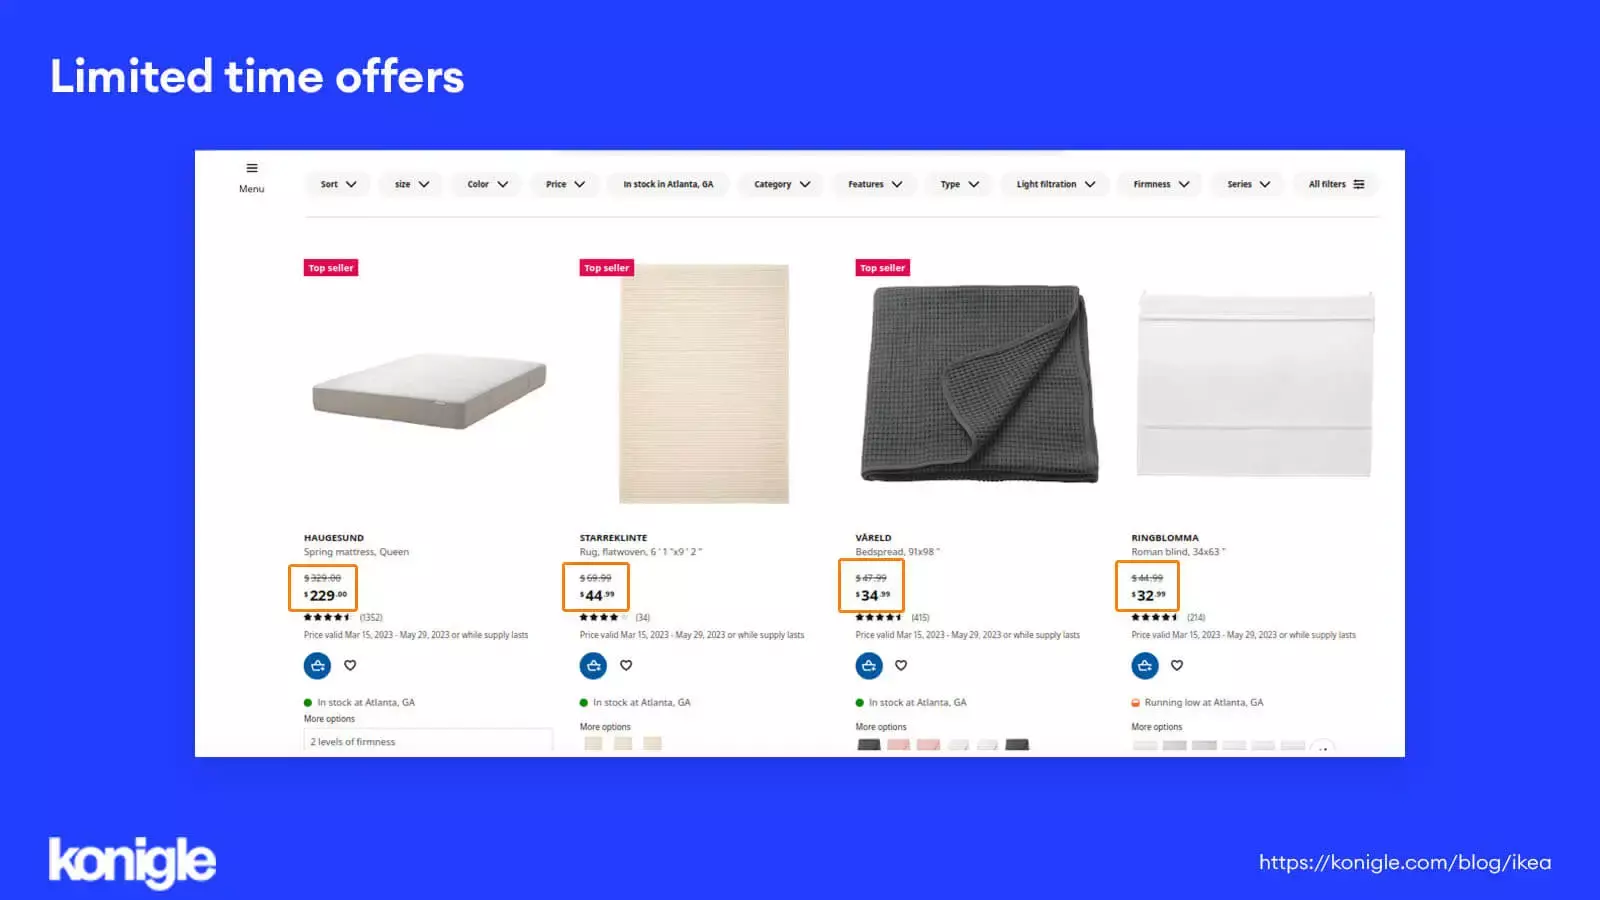 Ikea's website has limited-time offers on some products to encourage FOMO.